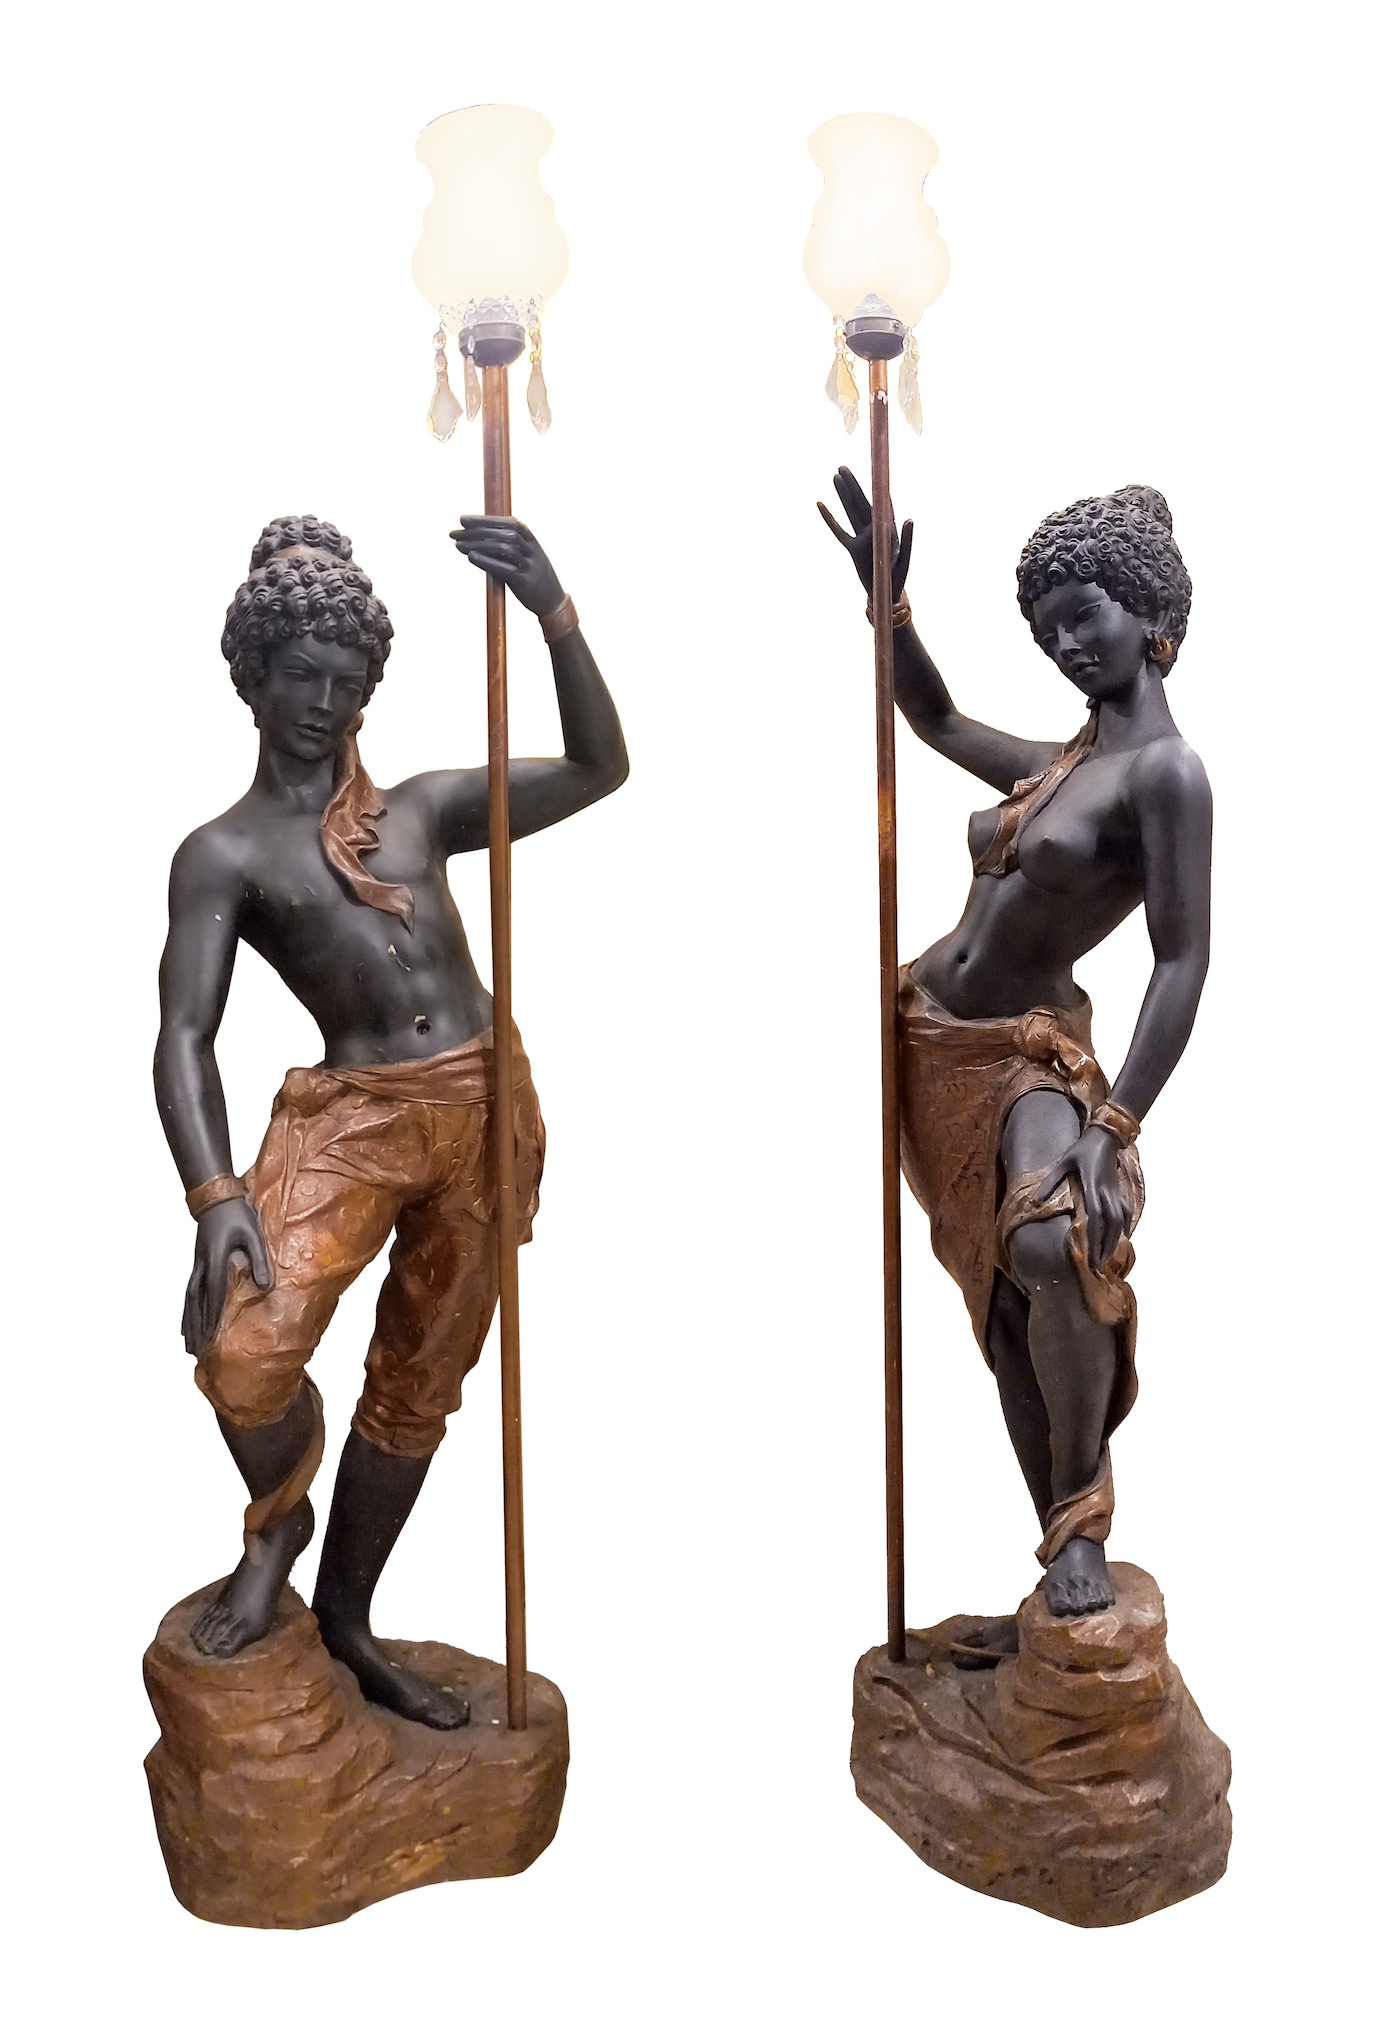 A pair of light stands in the form of European figurines